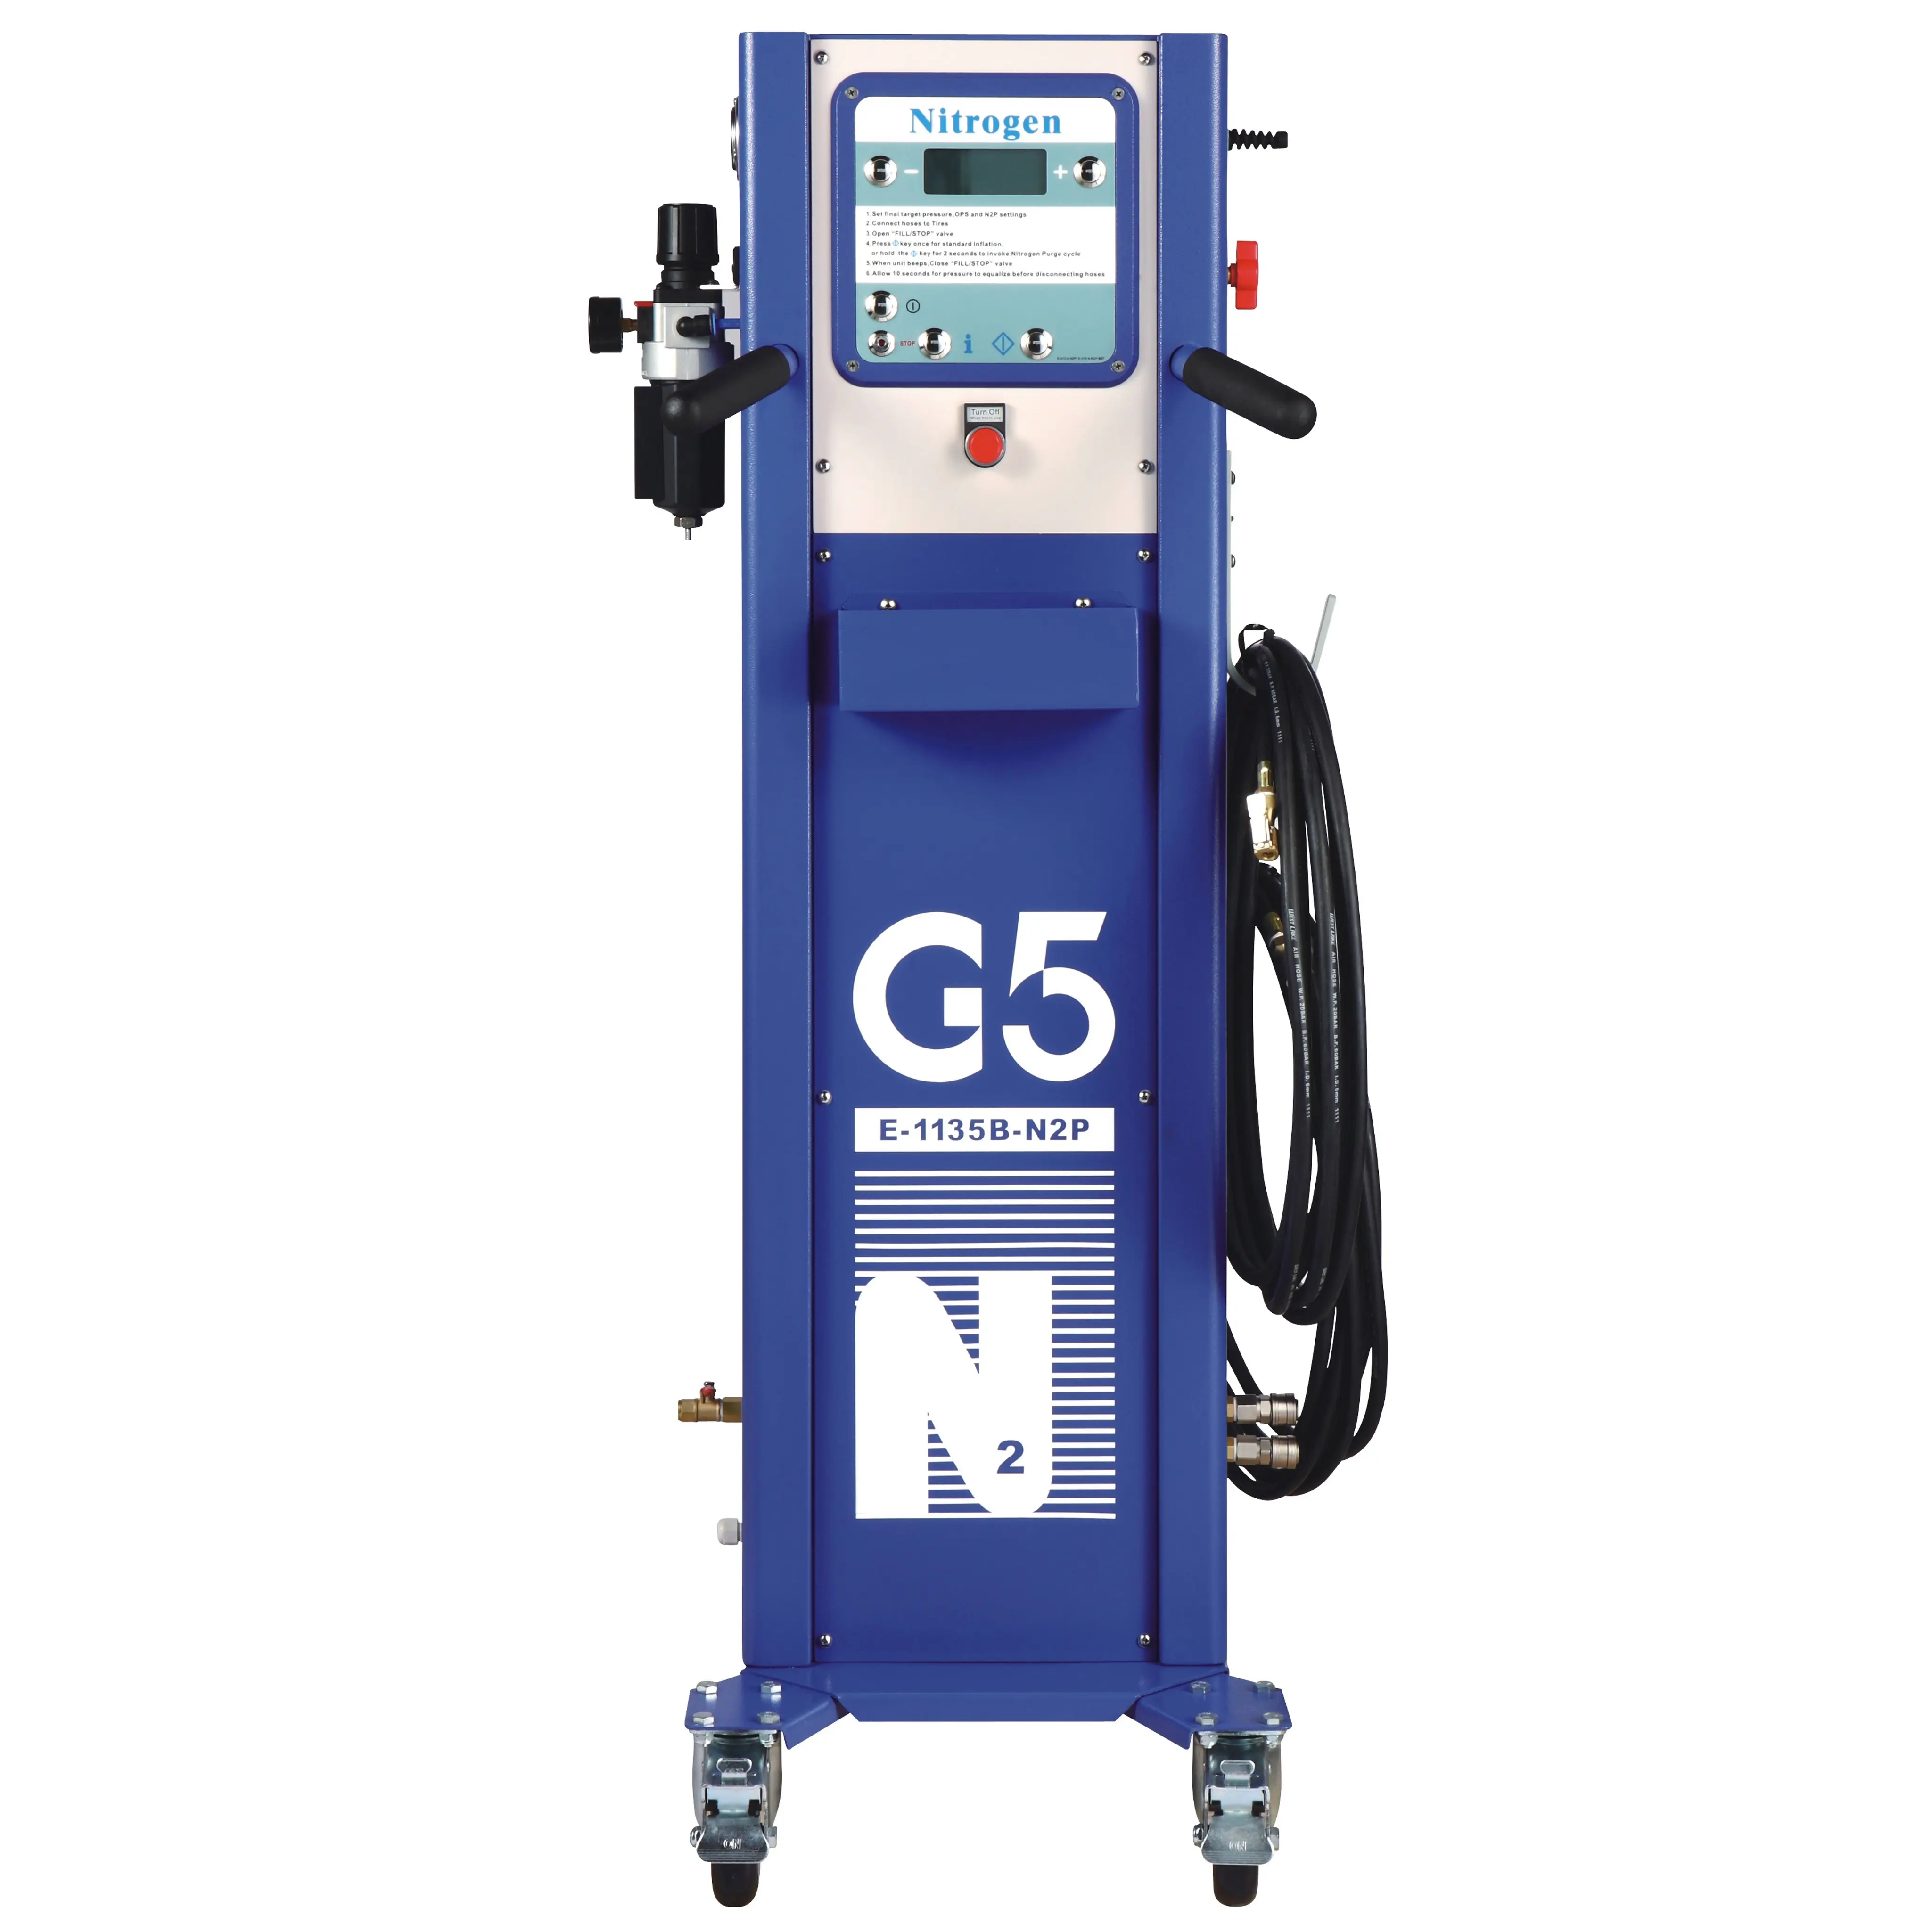 G5 Nitrogen Generator Automatic Tire Inflator Tires Shop n2 Purging System Tyre Air nitrogen Filling Machines